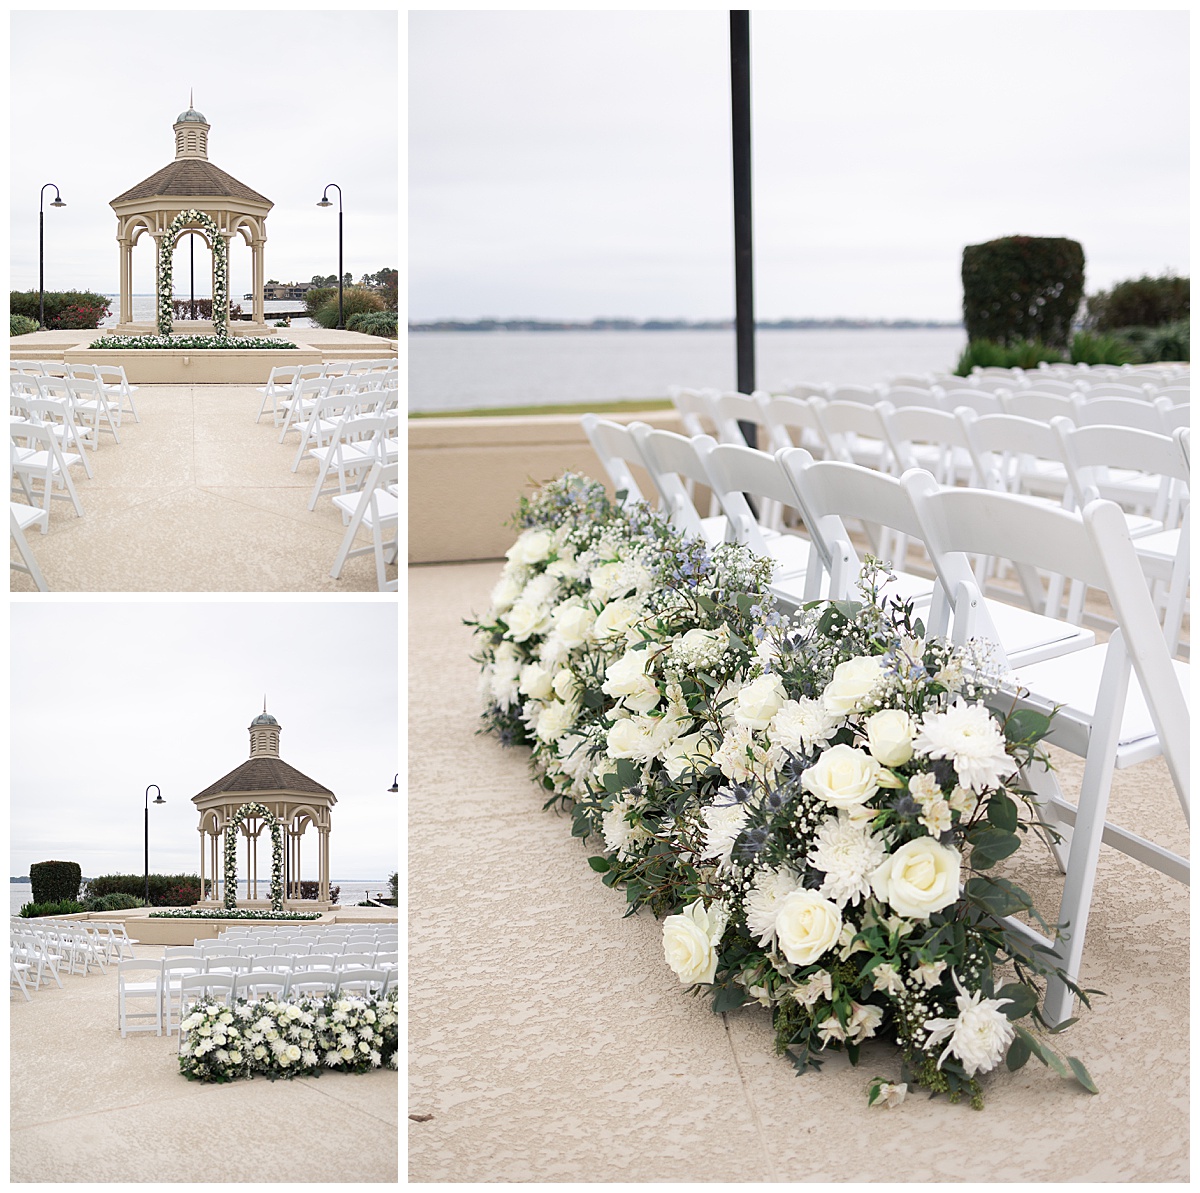 Stunning ceremony details and floral intsallations for Houston’s Best Wedding Photographers